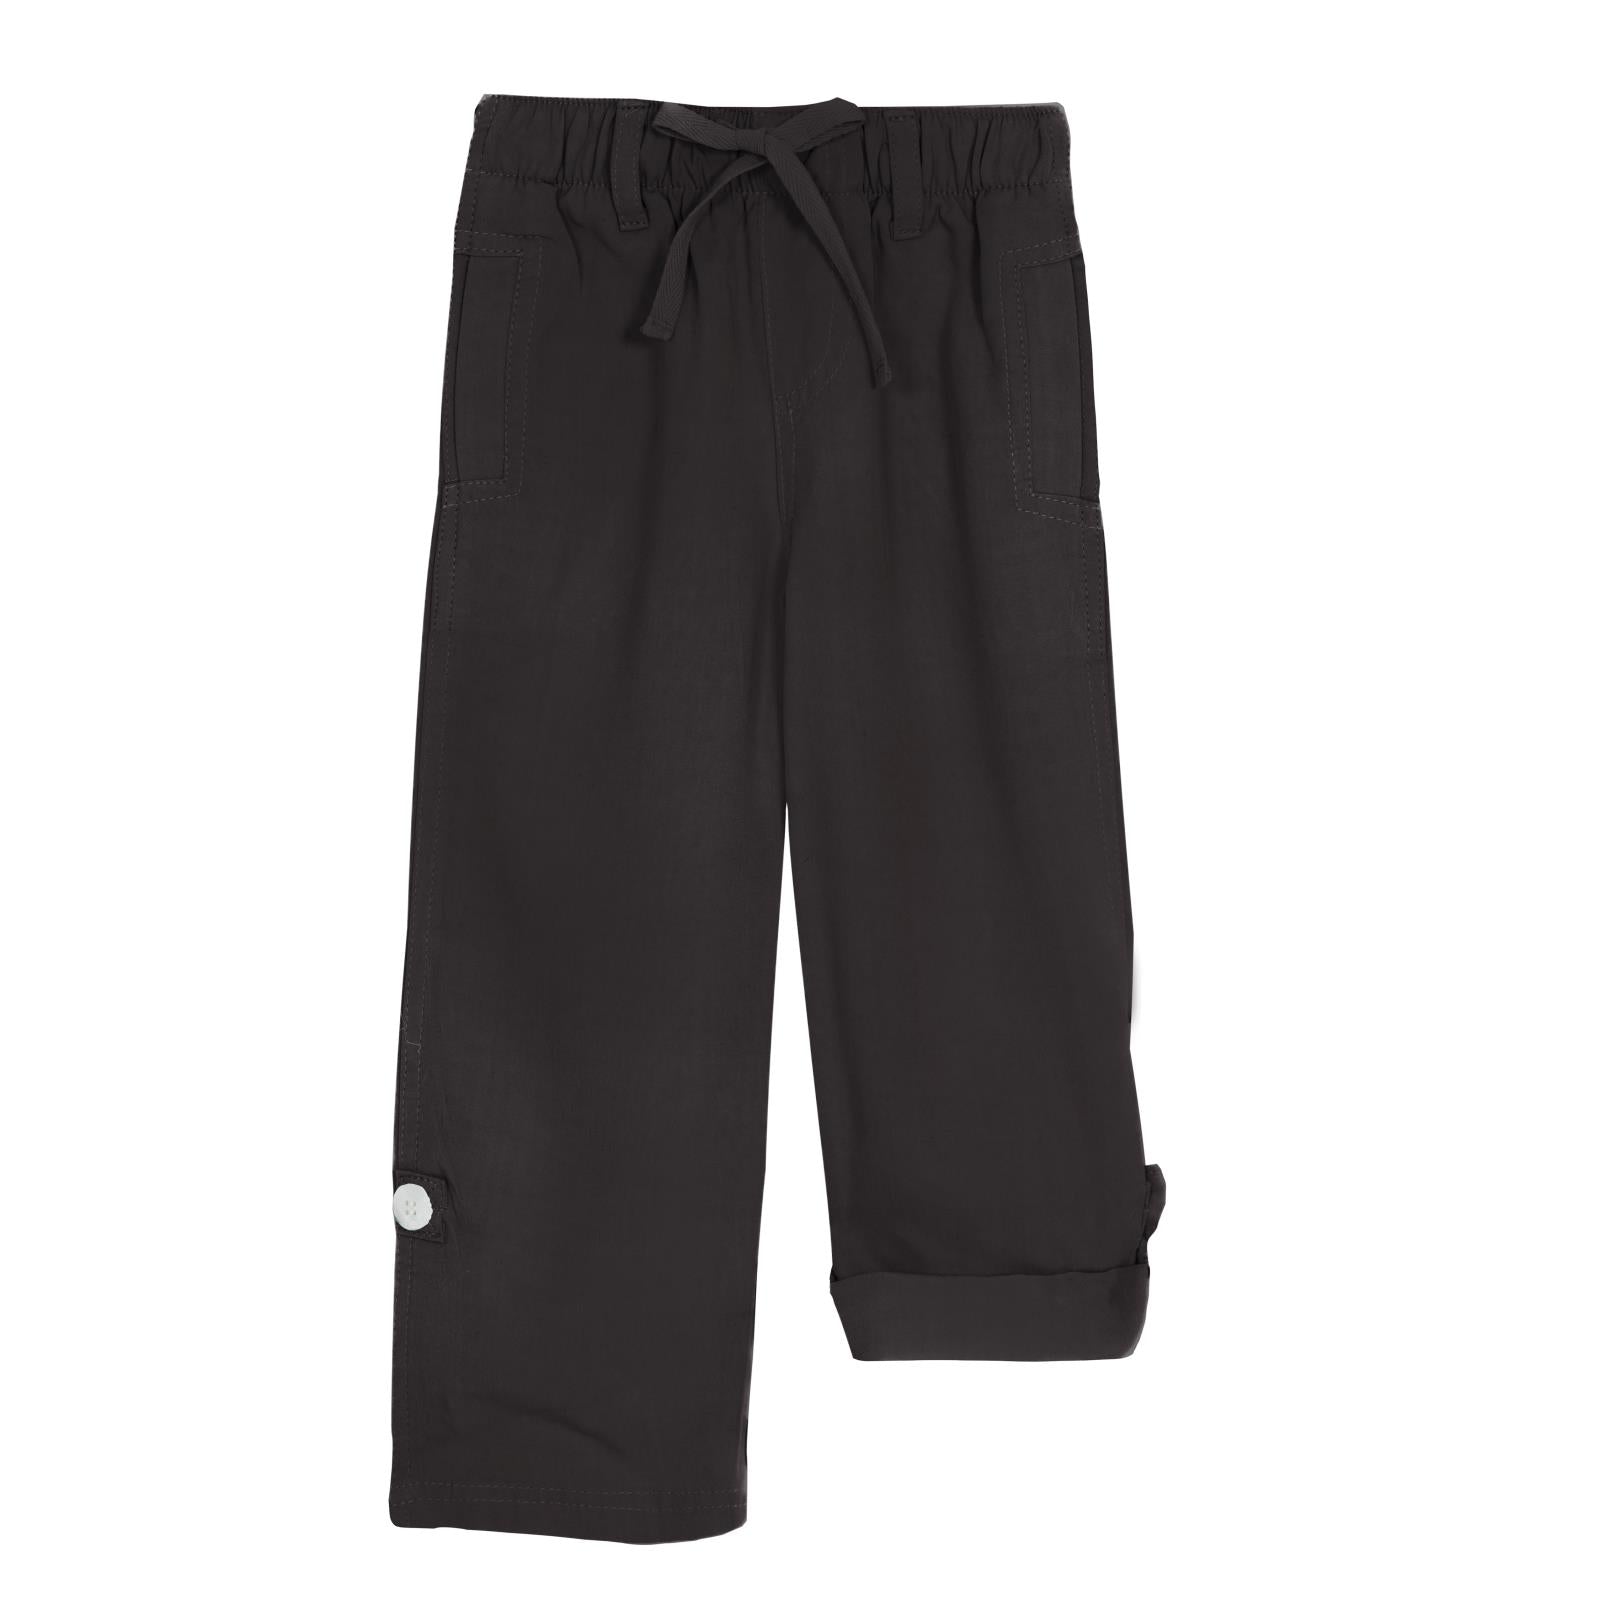 Woven Roll-Up Pants in Midnight